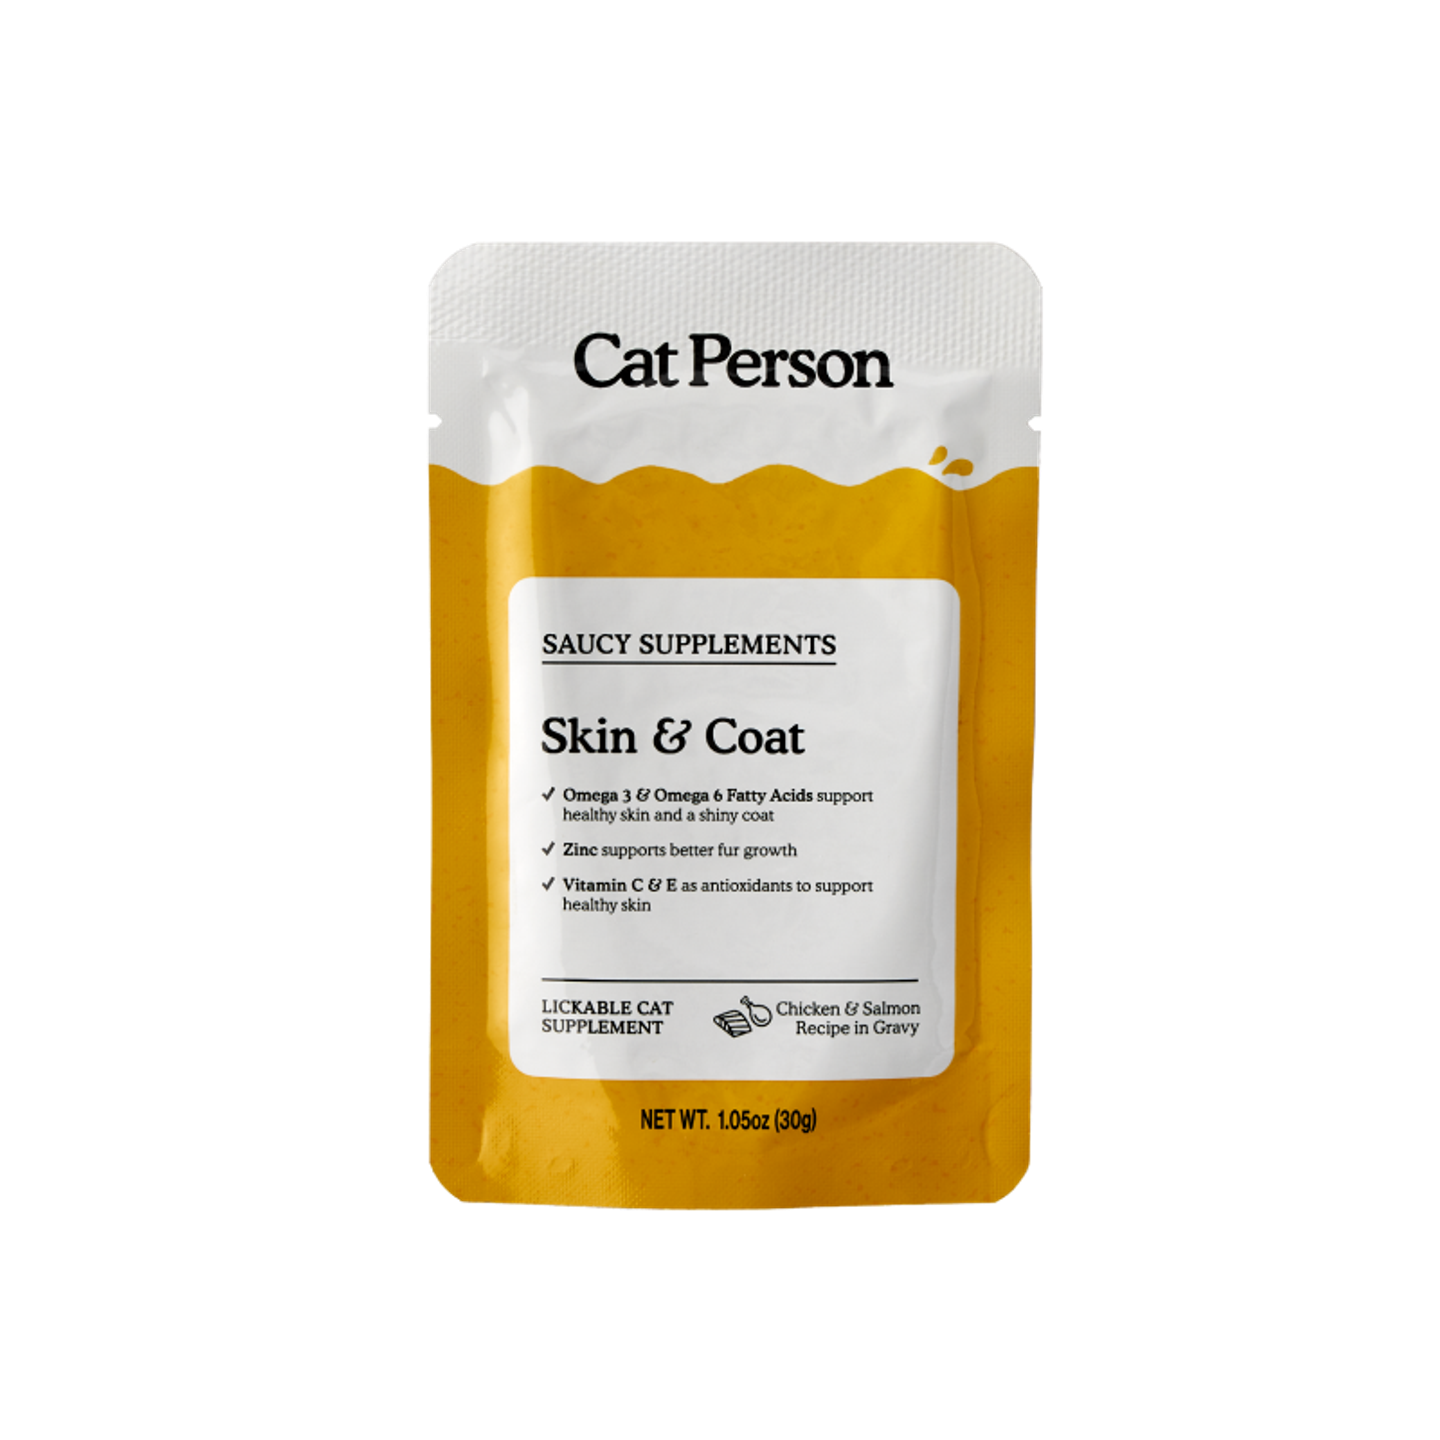 Pouch of Cat Person Skin & Coat Supplement